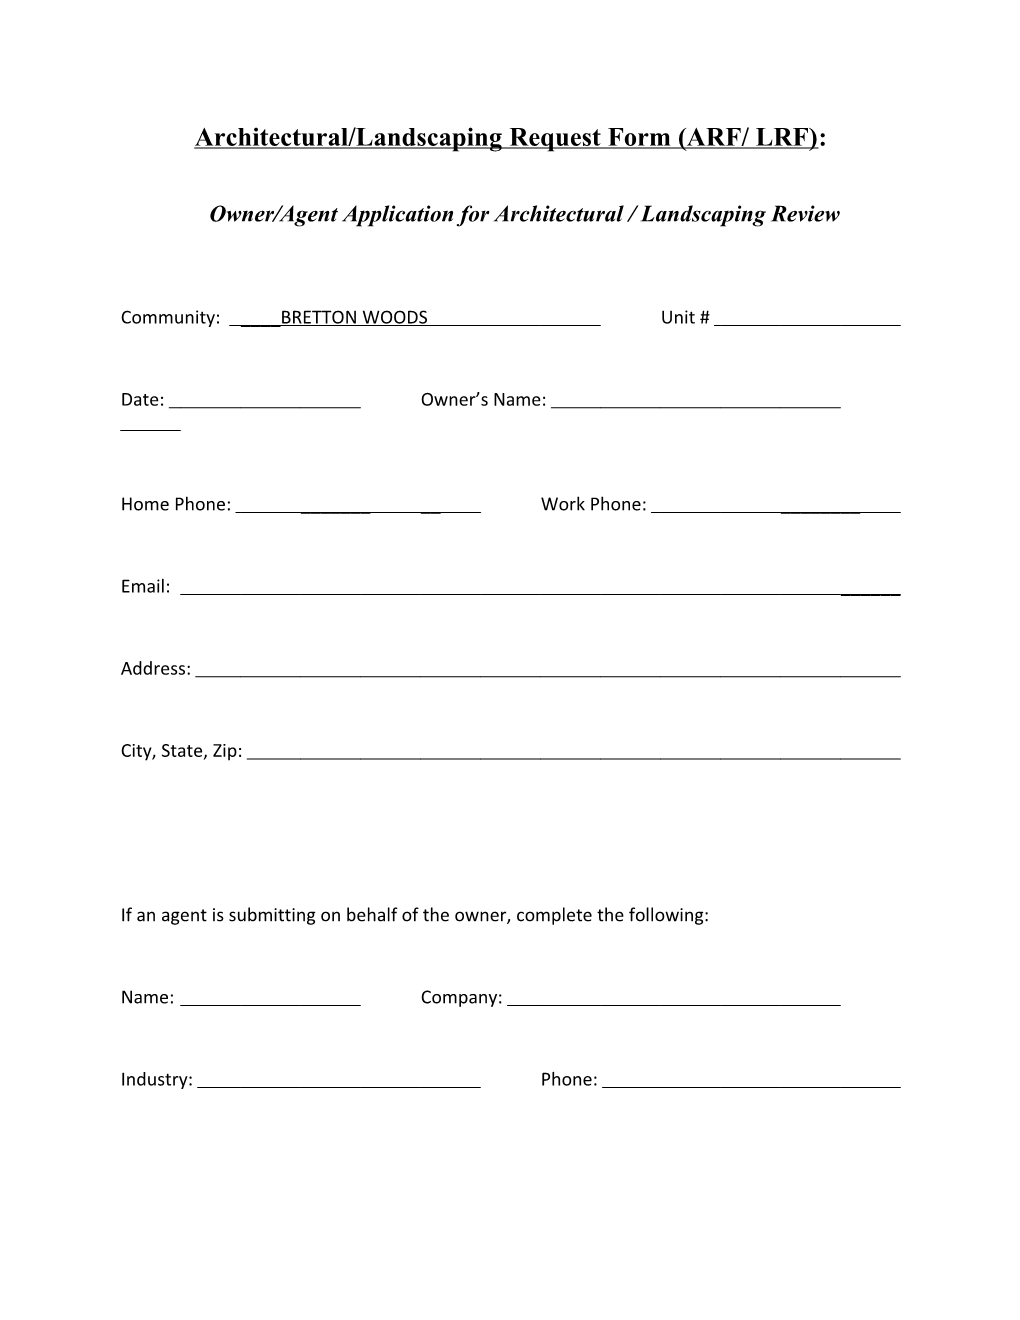 Architectural/ Landscaping Request Form (ARF/ LRF)